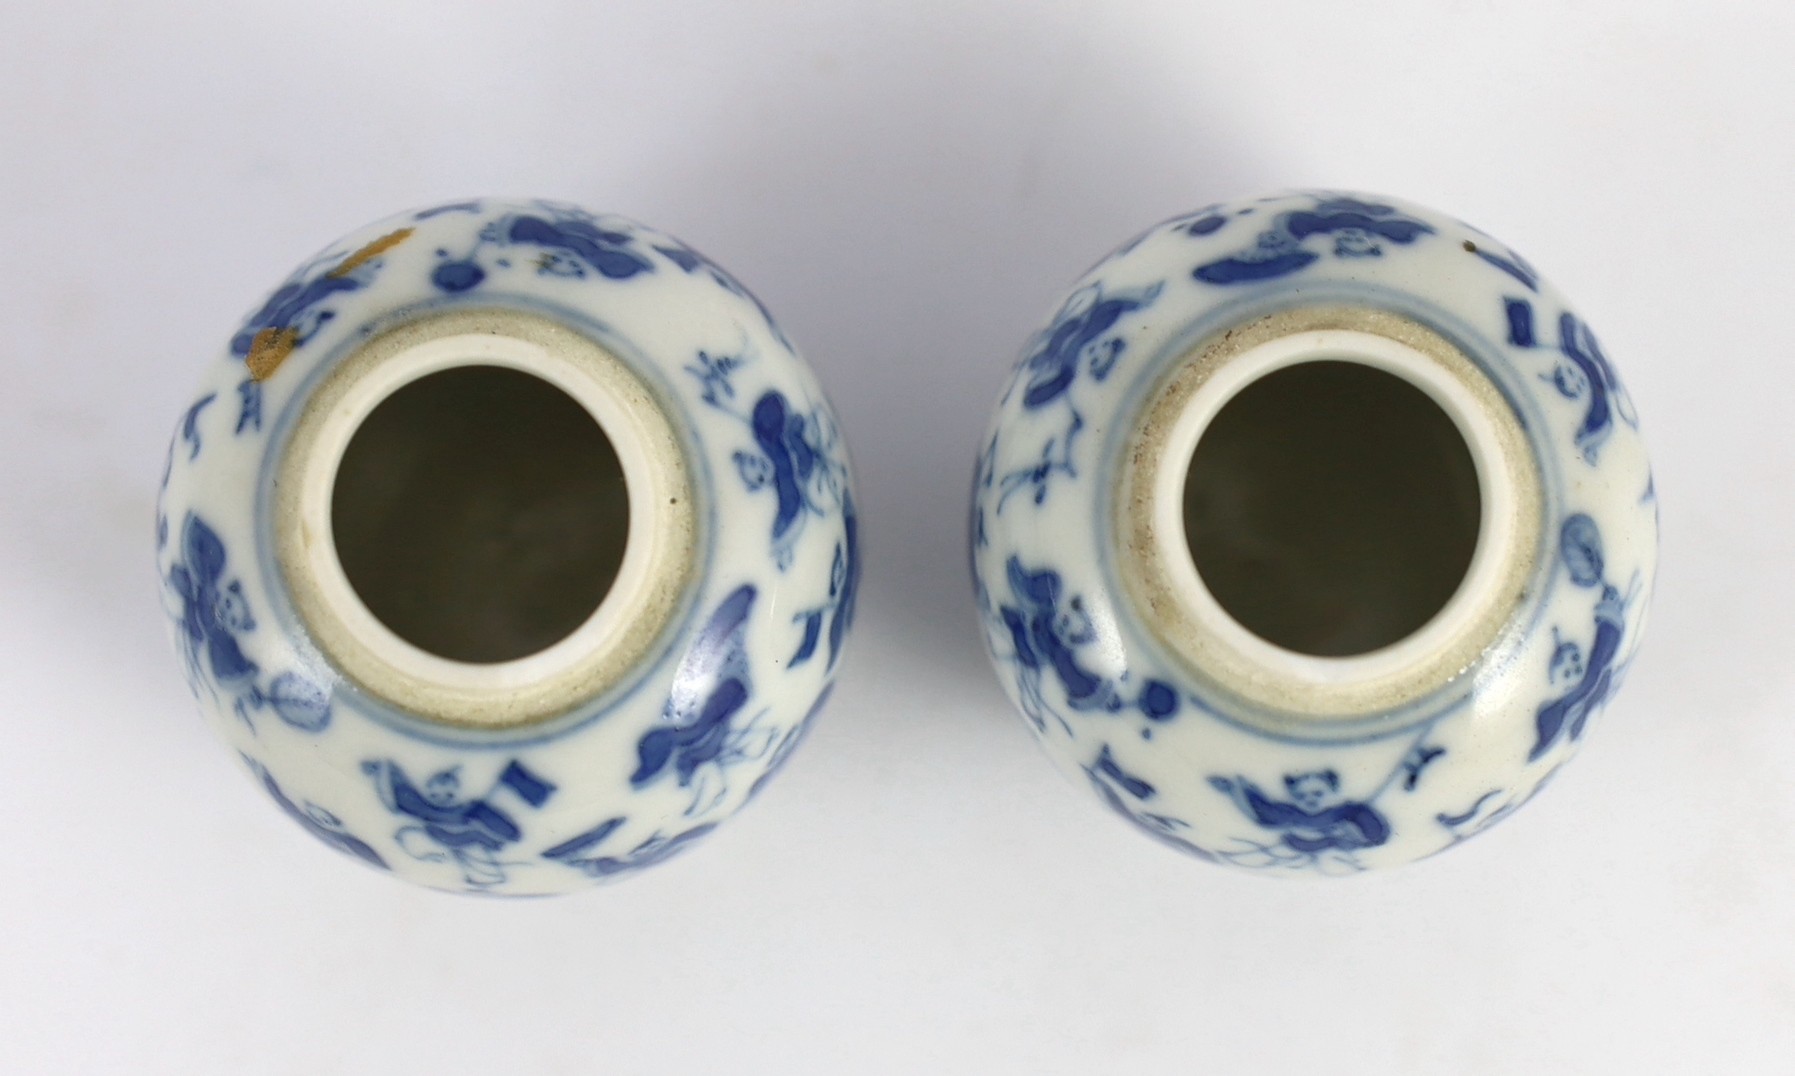 A pair of 19th century Chinese blue and white boys miniature jars and covers, 5.5 cm high - Image 4 of 5